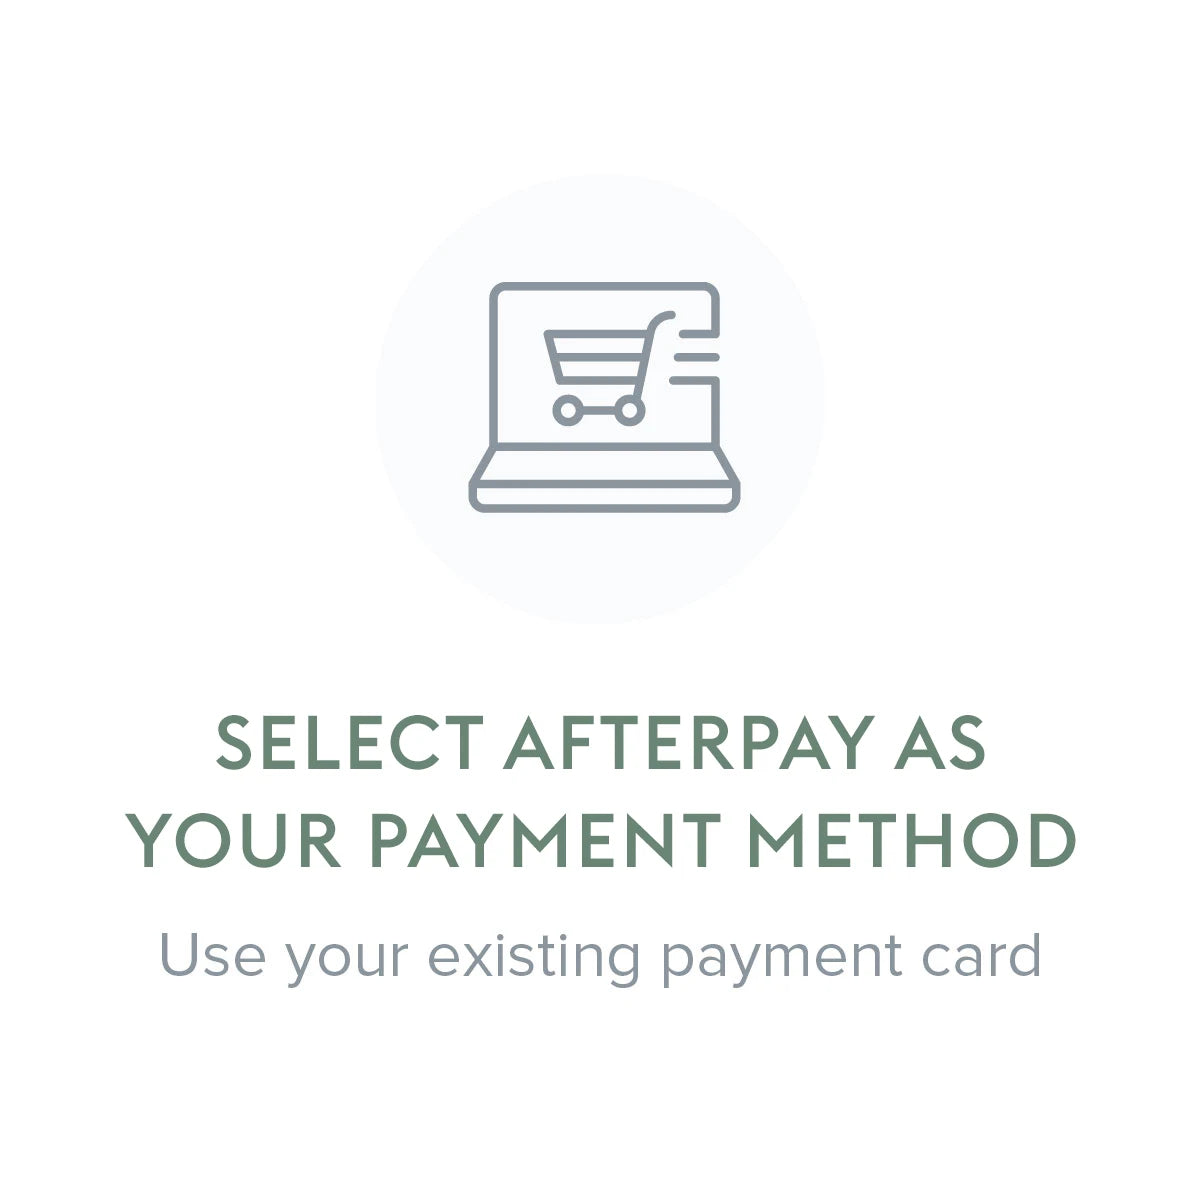 Select Afterpay as your payment method